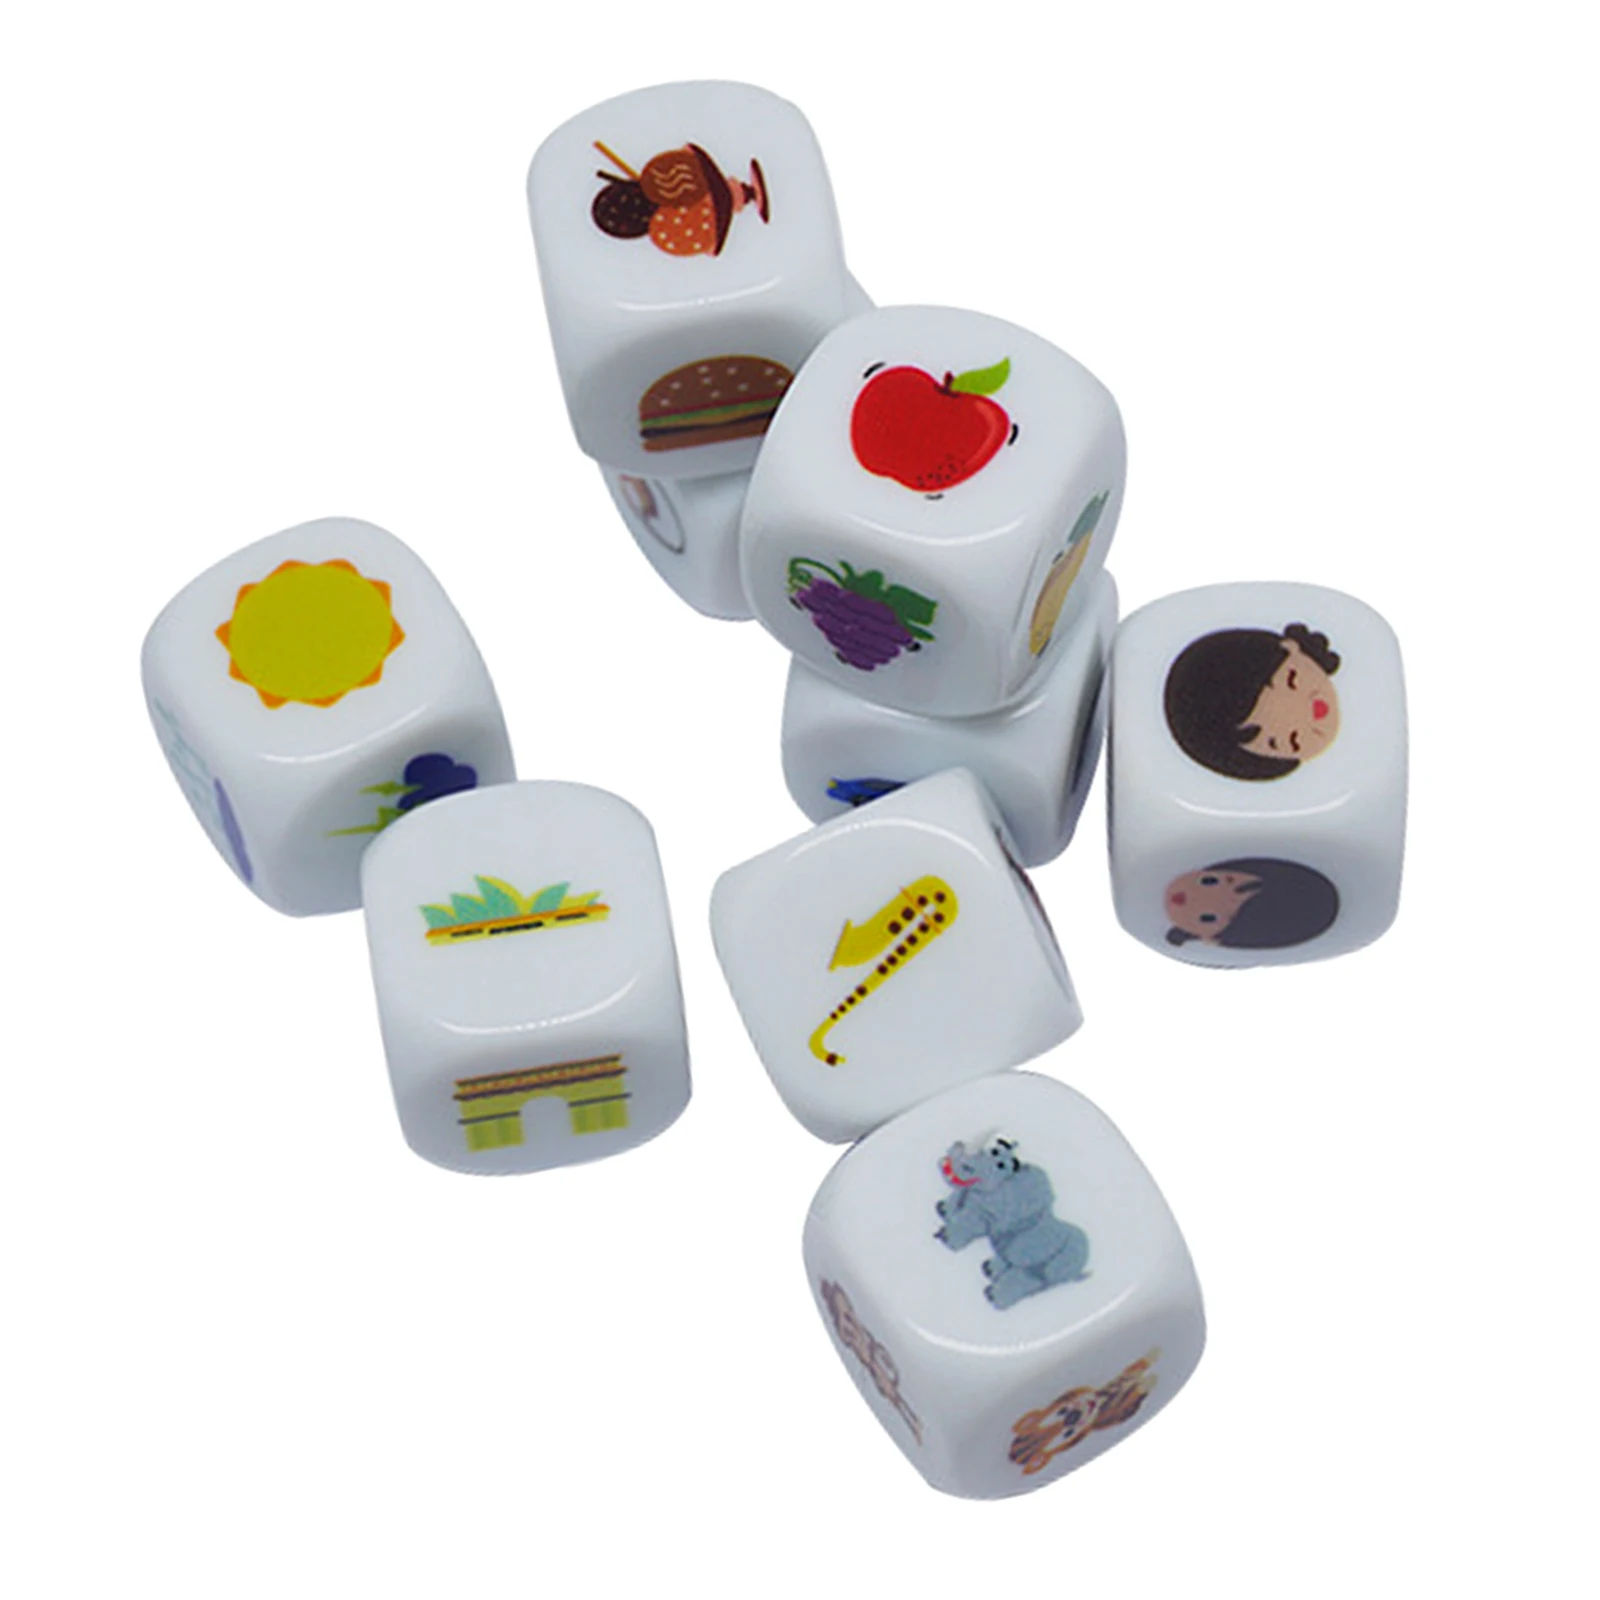 9 pcs Dice Telling Story Story Dice Game Family Party Funny Imagine Toys